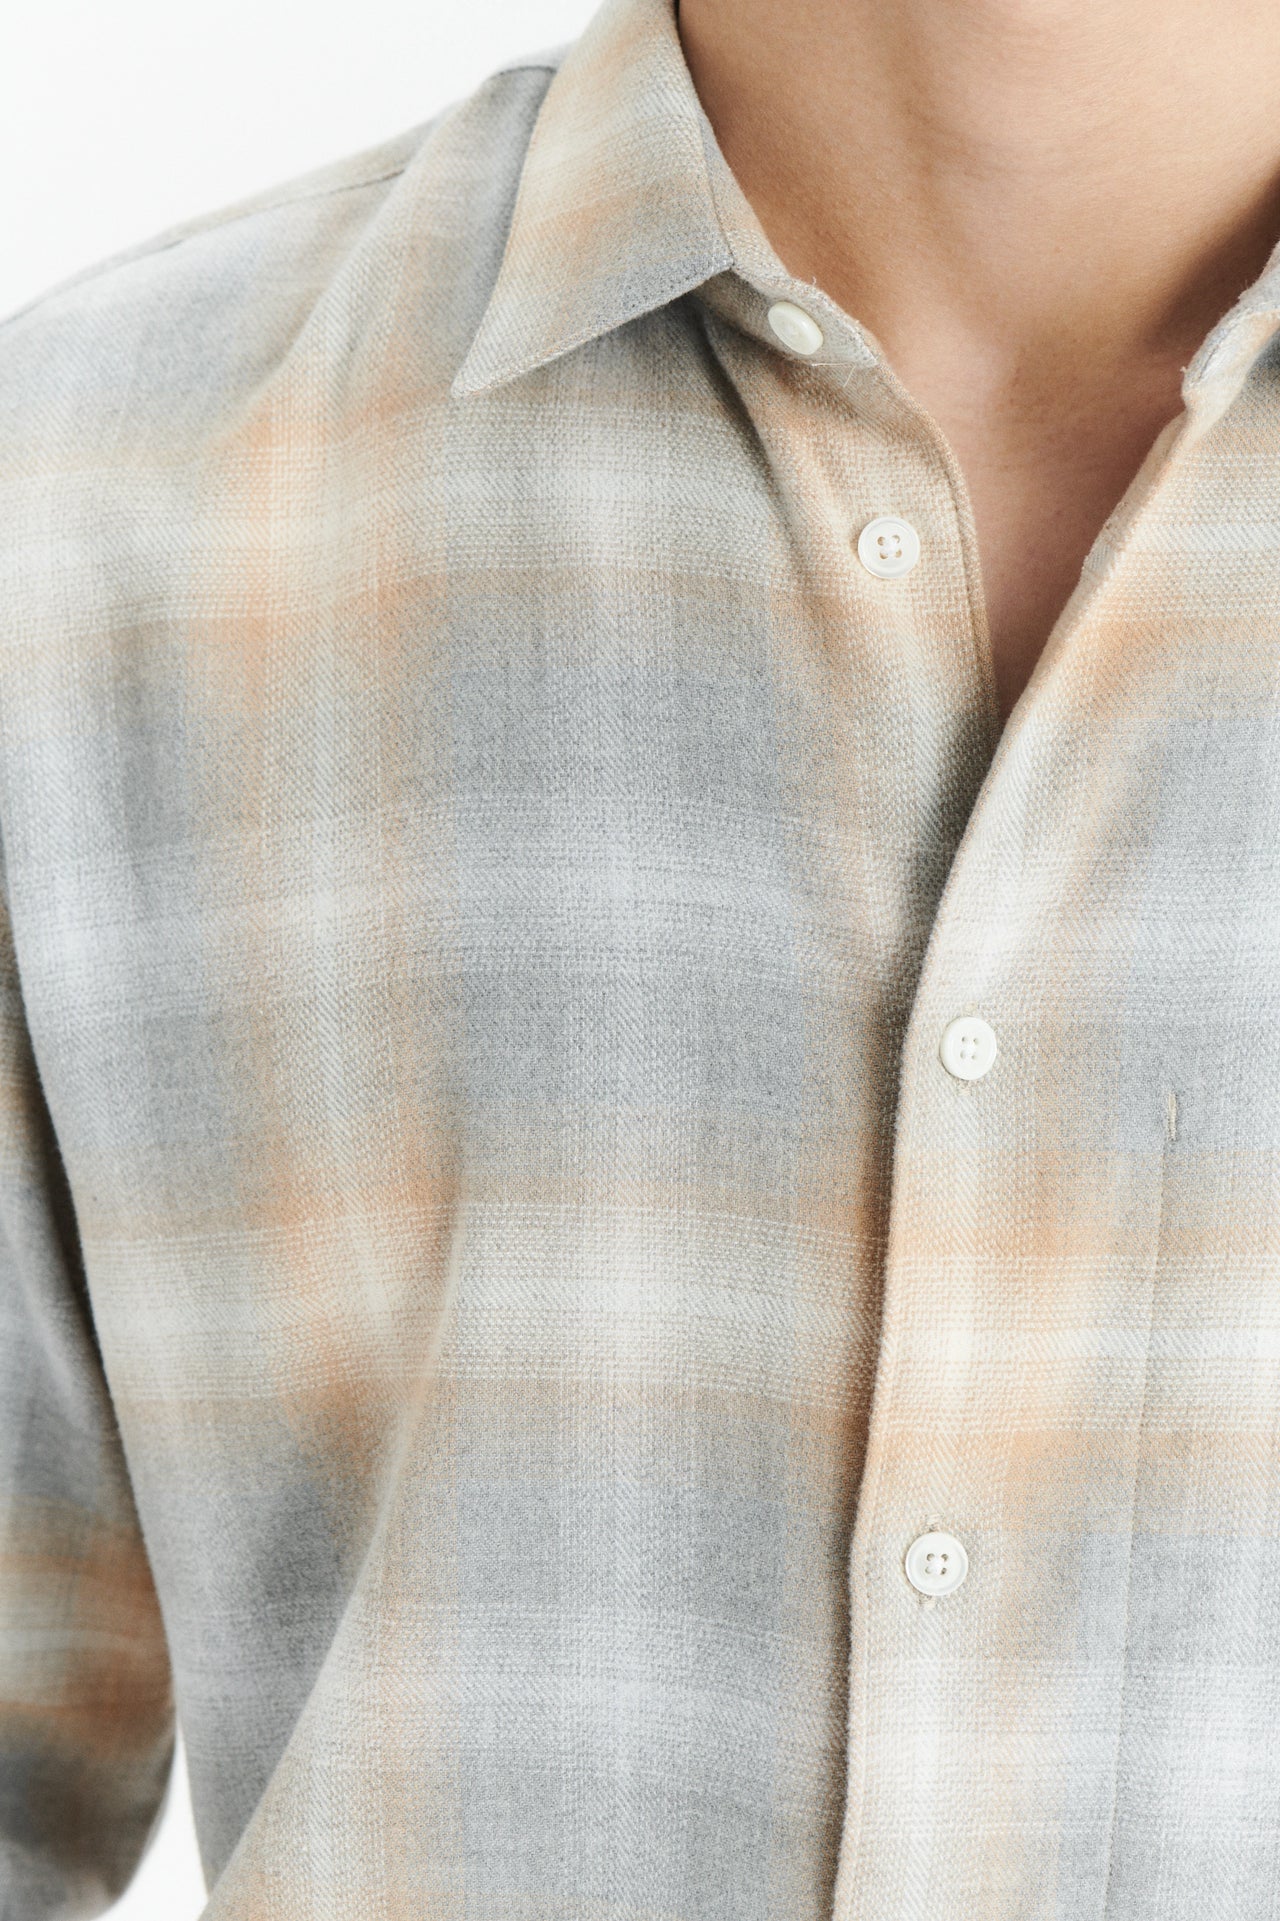 Feel Good Shirt in a Soft Tonal Beige and Grey Chequered Italian Cotton Flannel